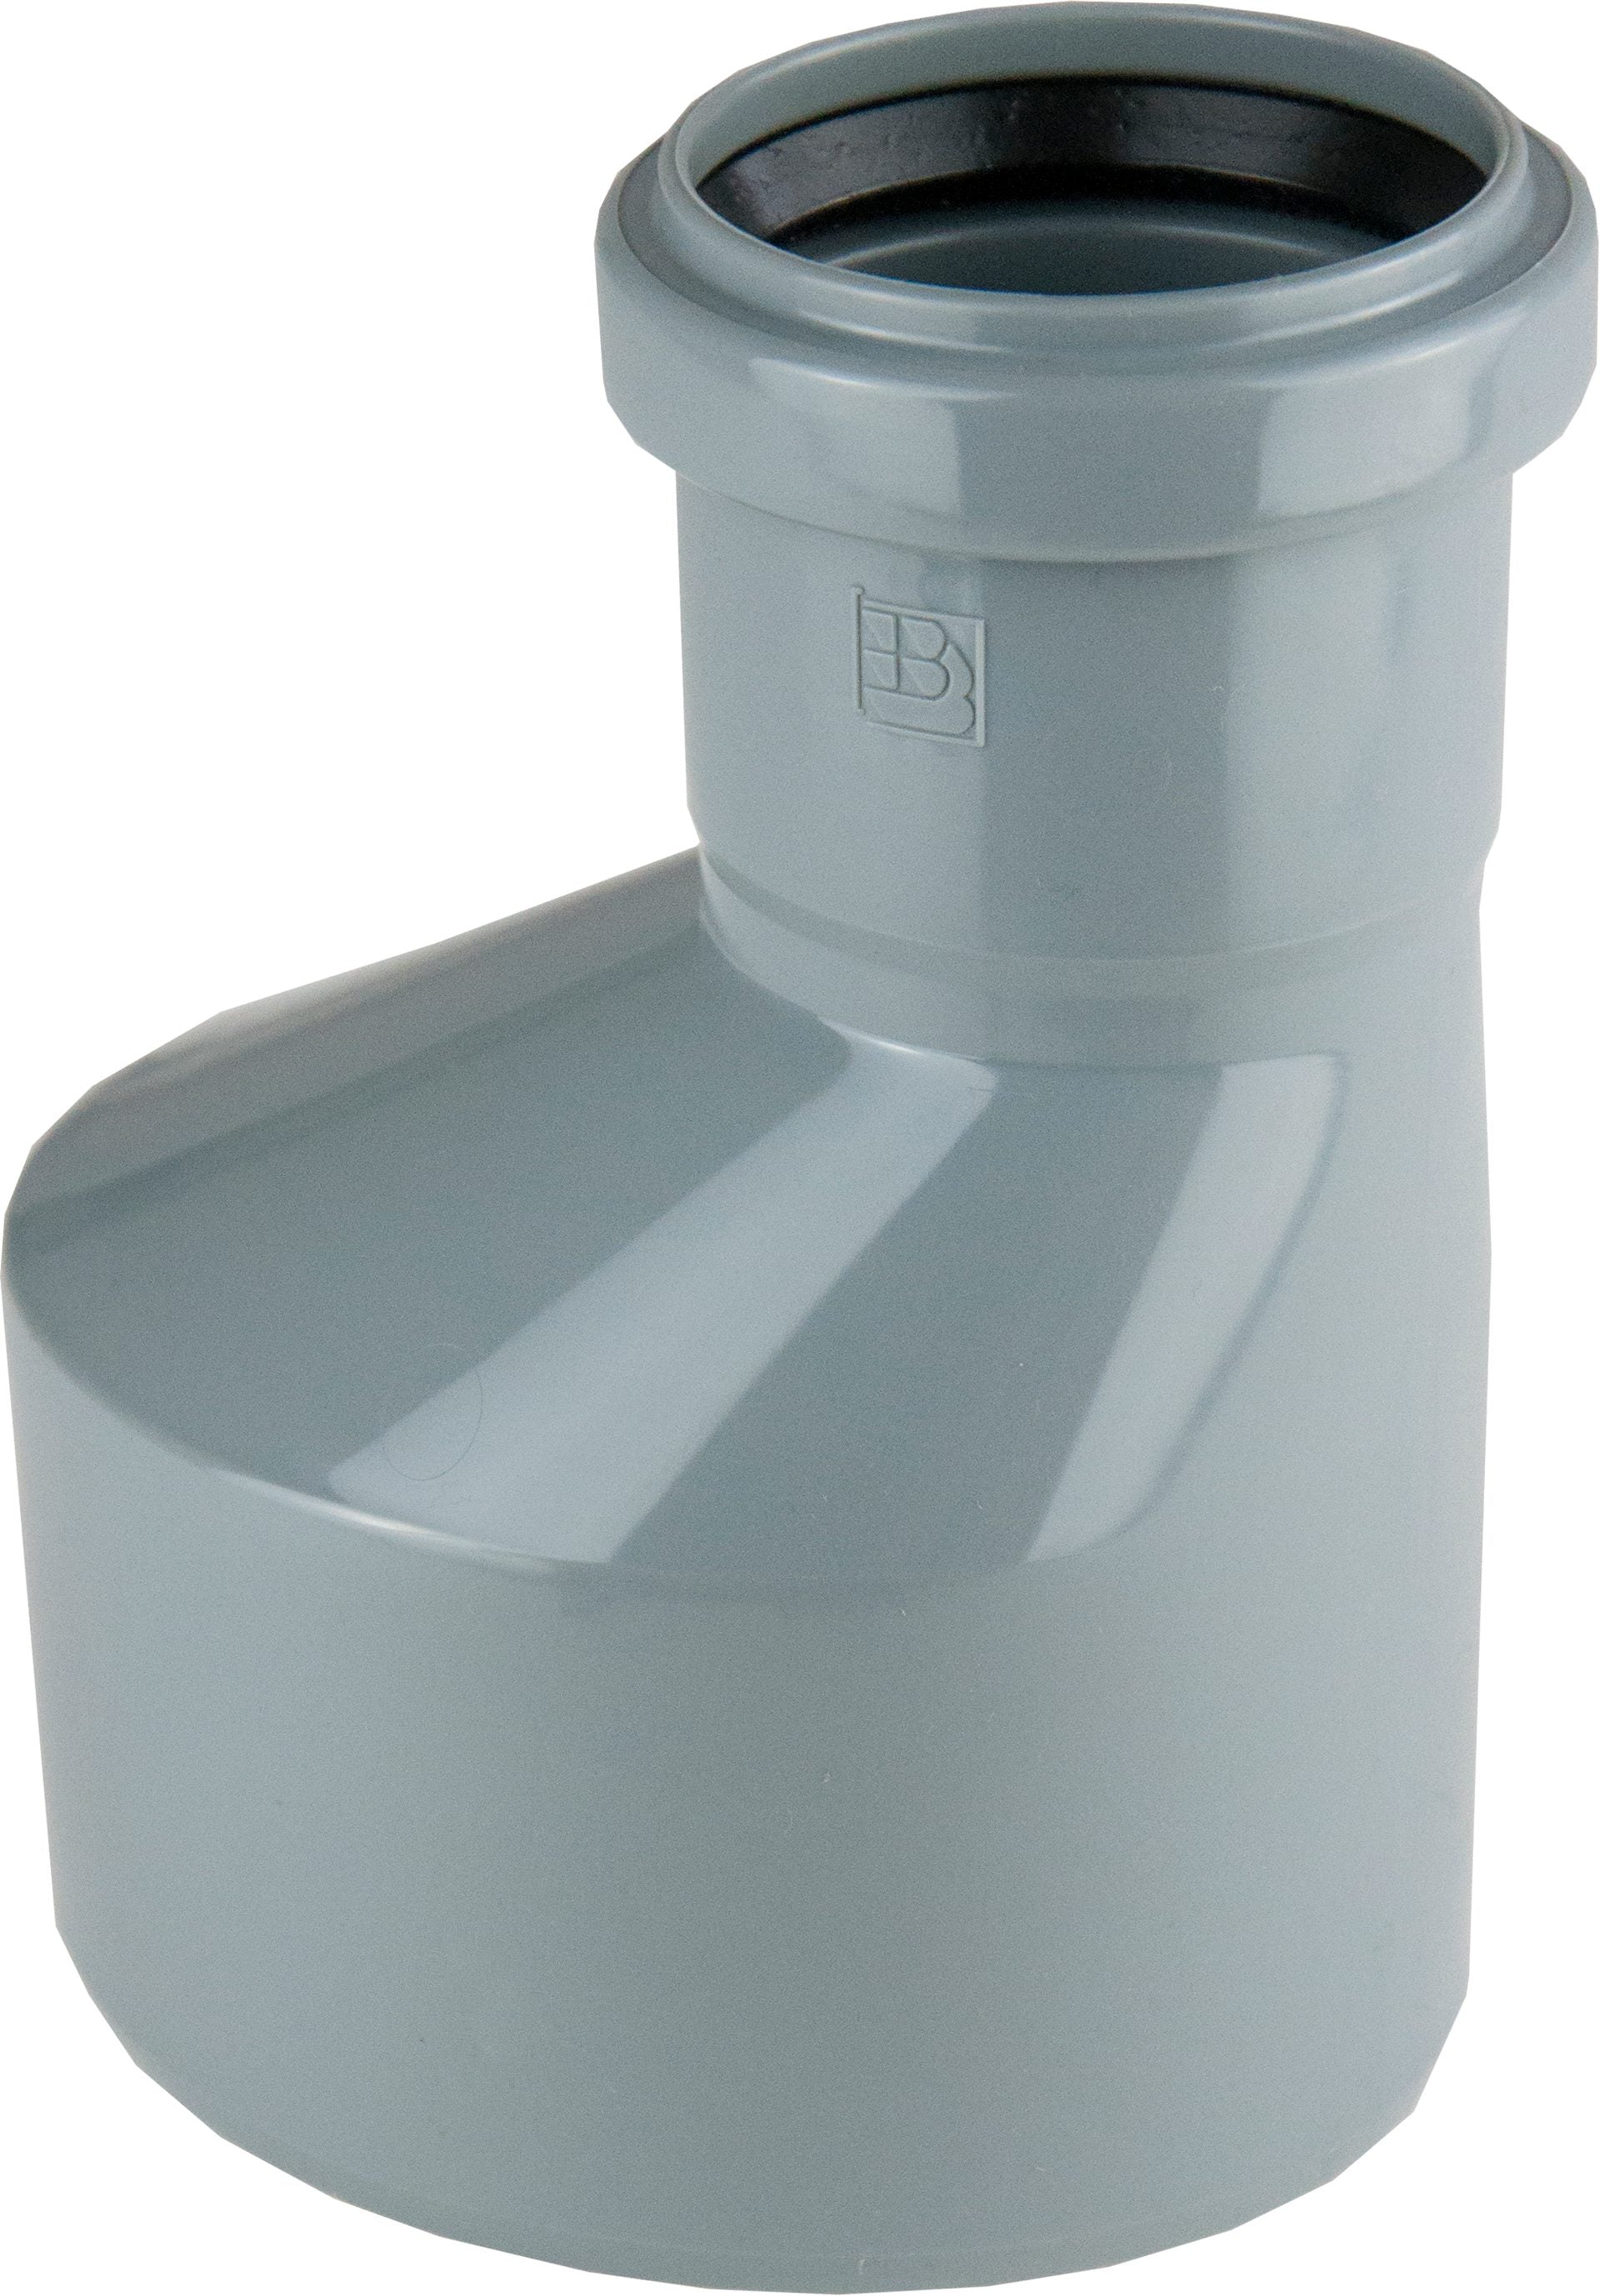 Reducer for Indoor drainage Kaczmarek Fonica PP HT Grey